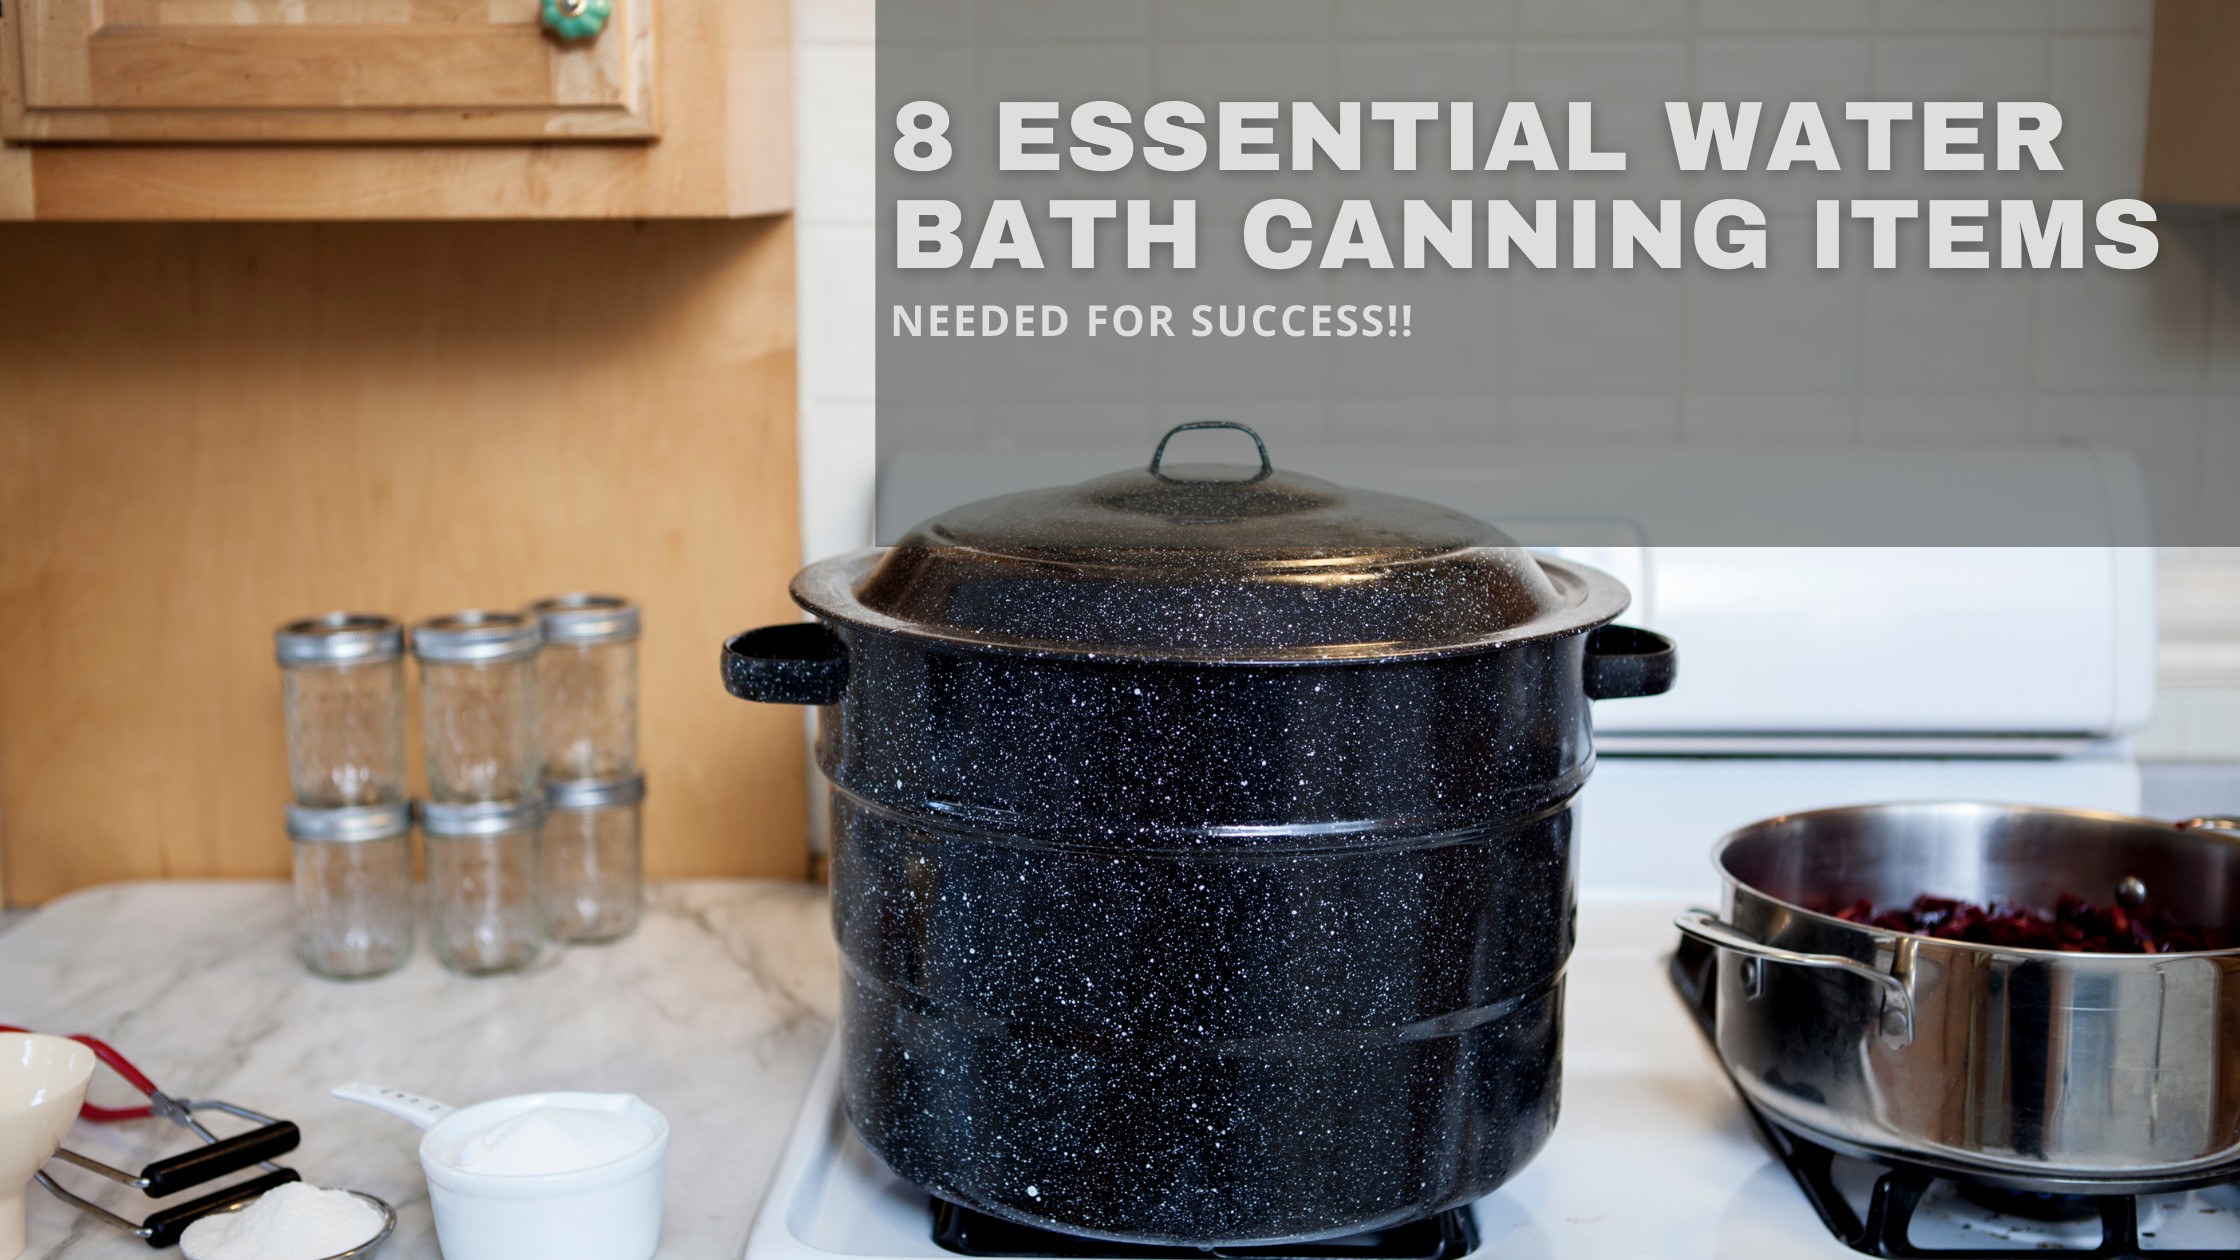 Items Needed For Water Bath Canning